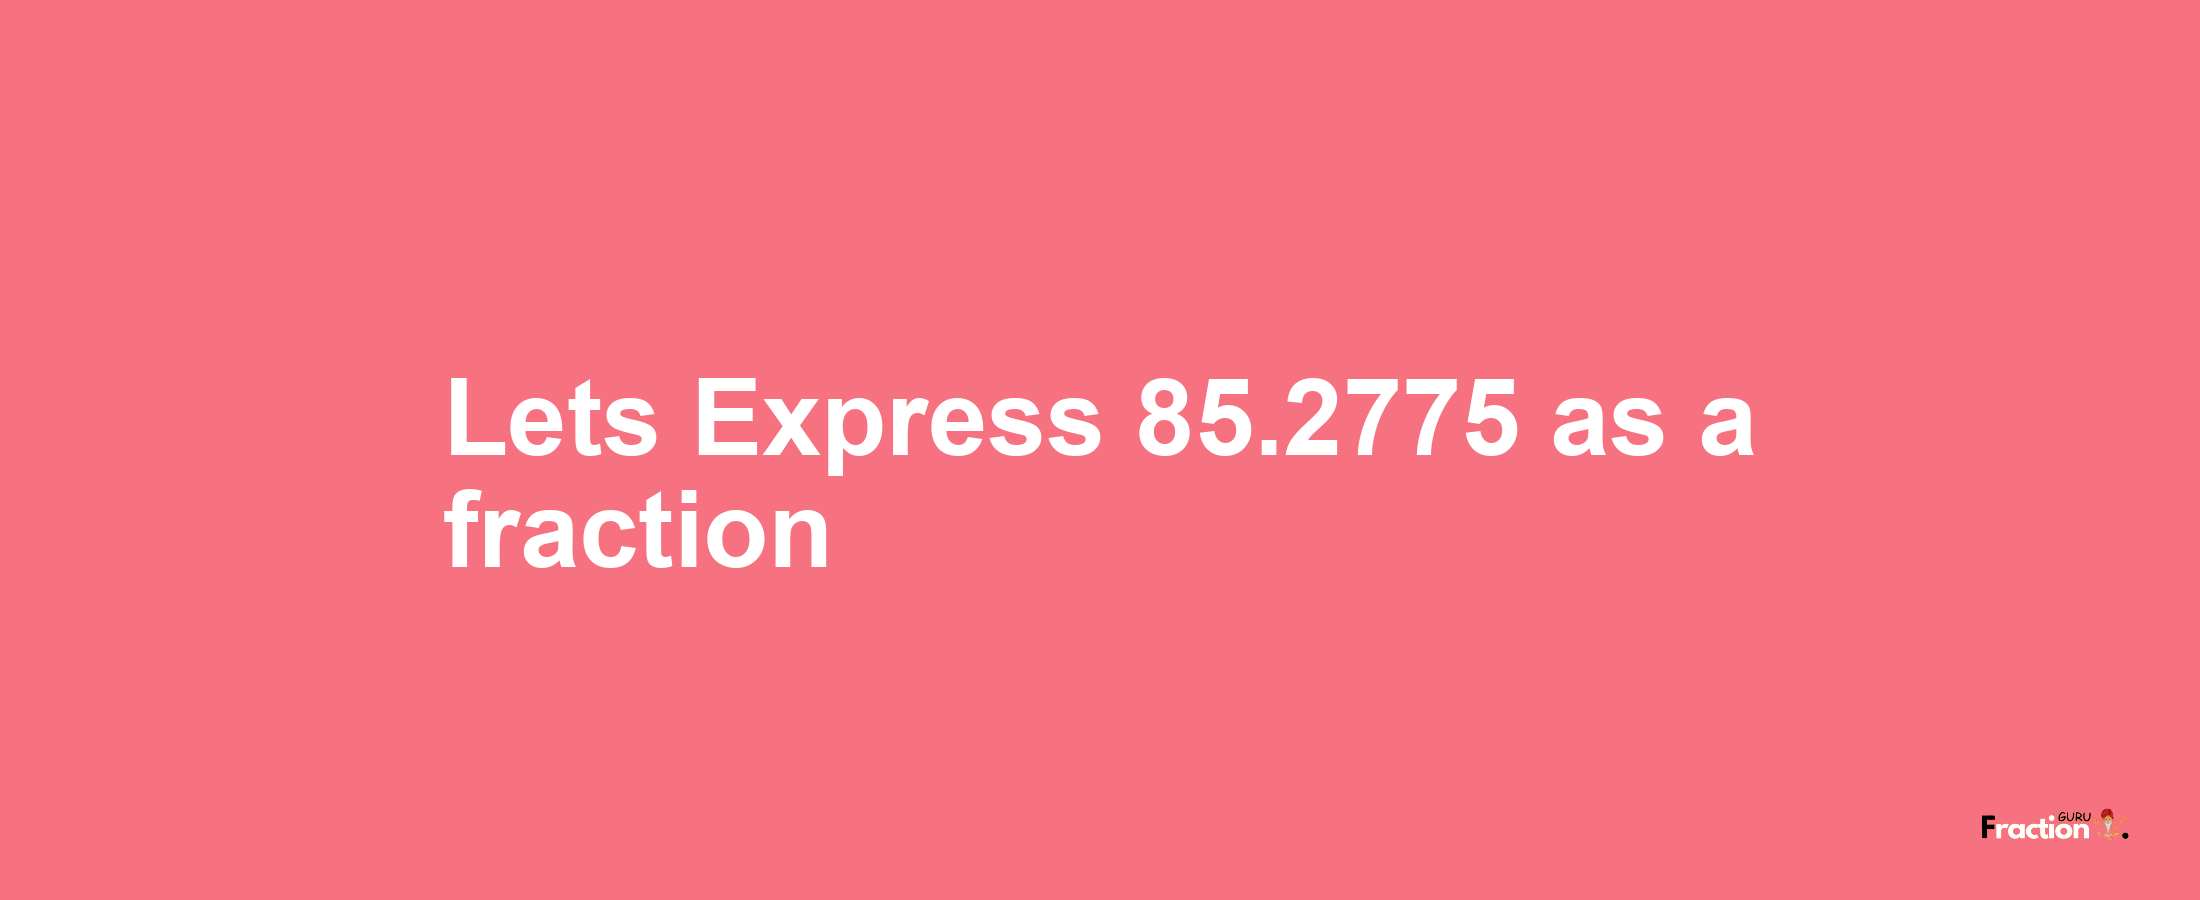 Lets Express 85.2775 as afraction